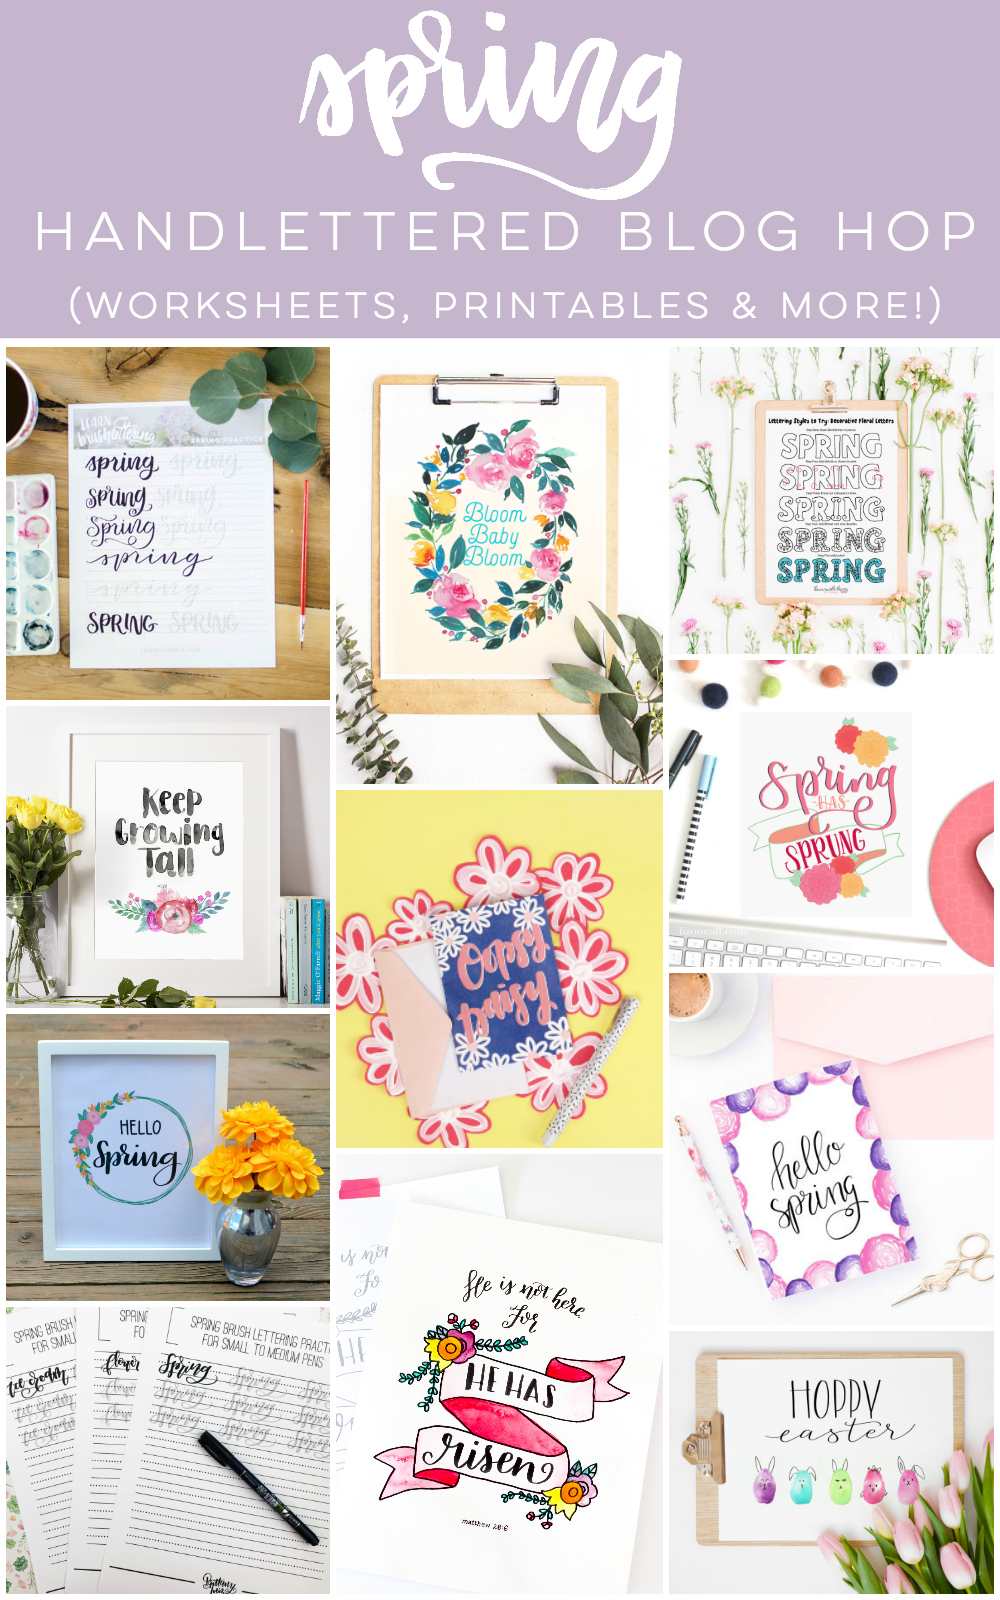 Spring Hand Lettering Blog hop- I LOVE all the tutorials and practice sheets!